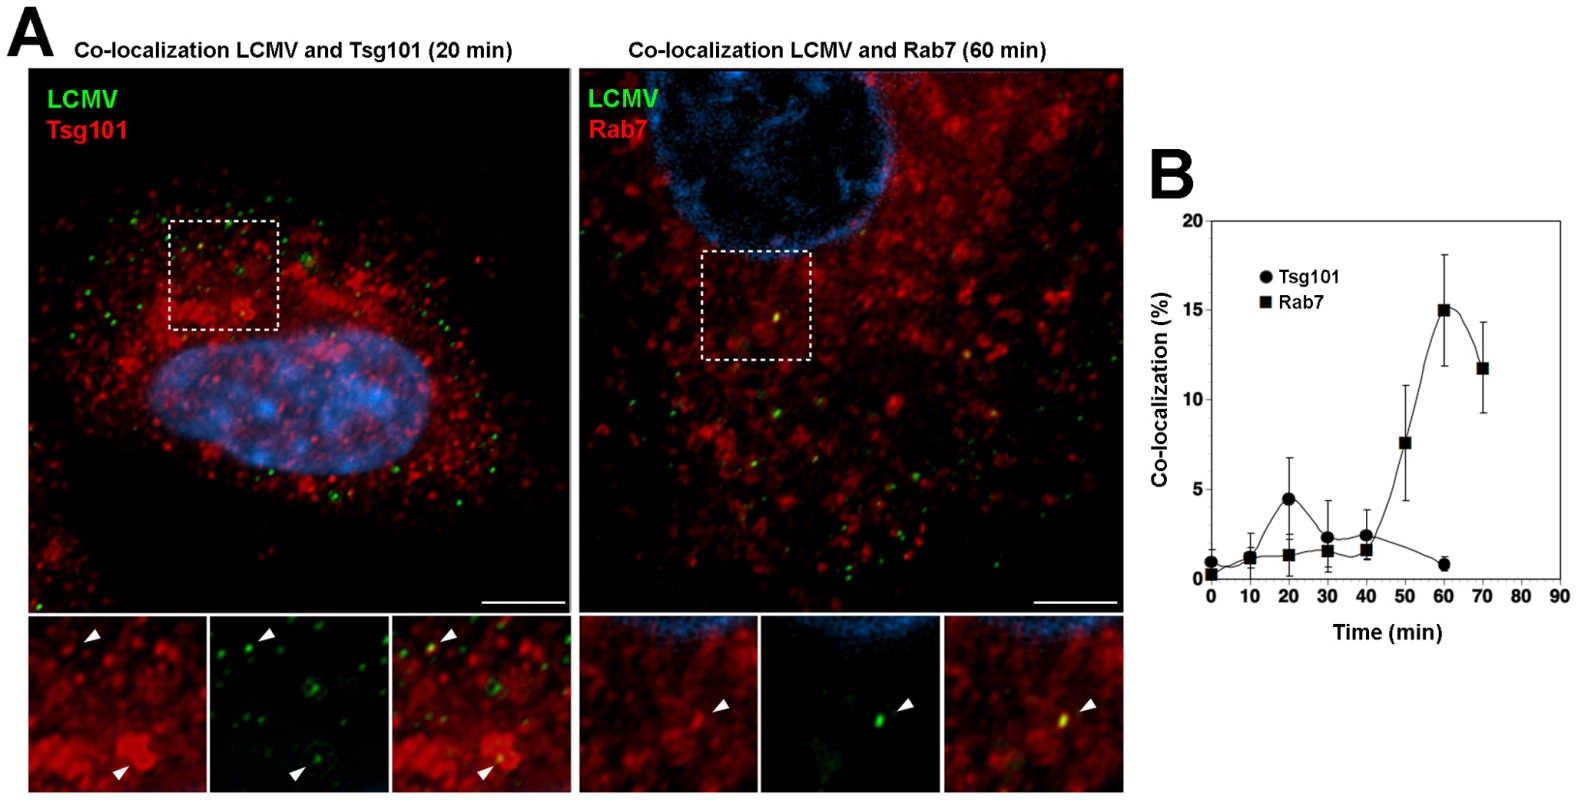 Incoming LCMV transiently co-localized with Tsg101 prior to reaching late endosomes.